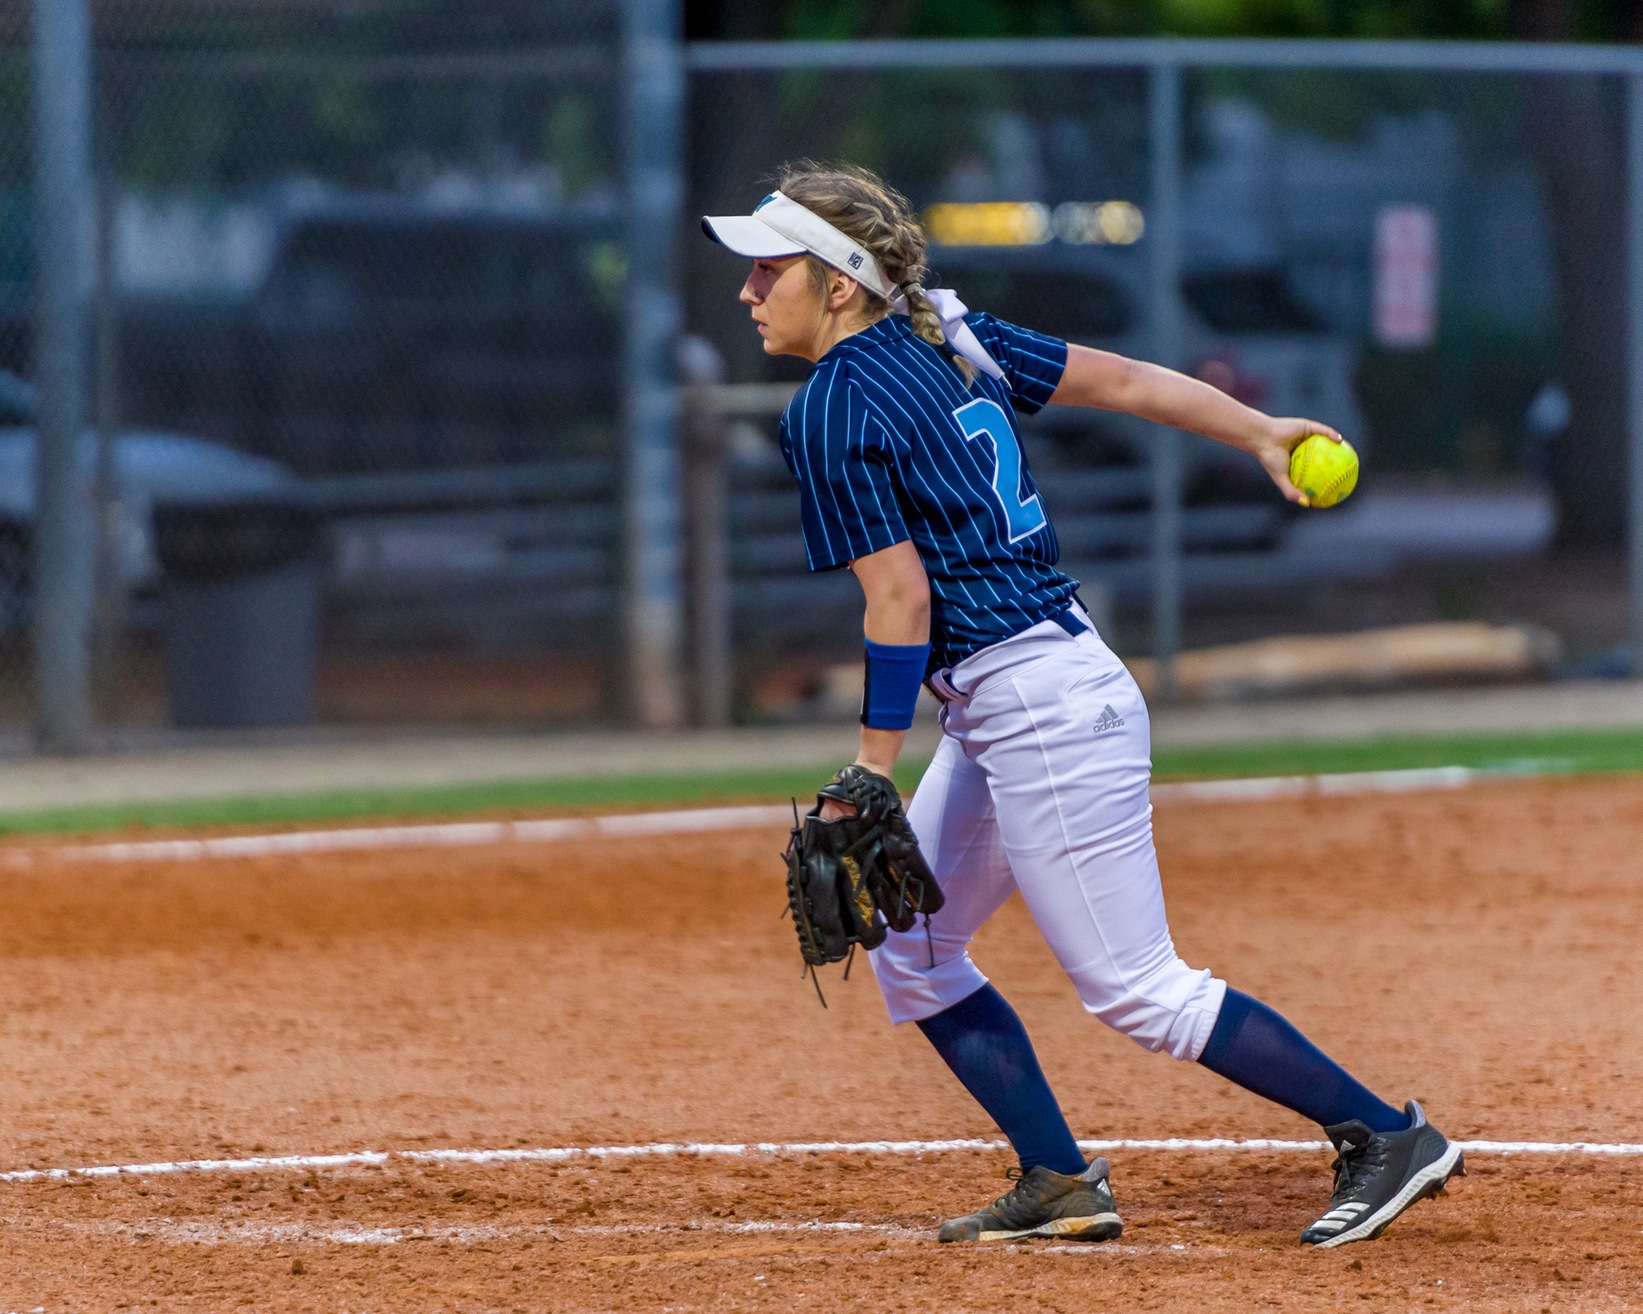 Sophomore Michaela Epp faced 25 batters in the Reivers double-header with College of Central Florida.

PHOTO COURTESY OF CAPTIVEPHOTONS.COM